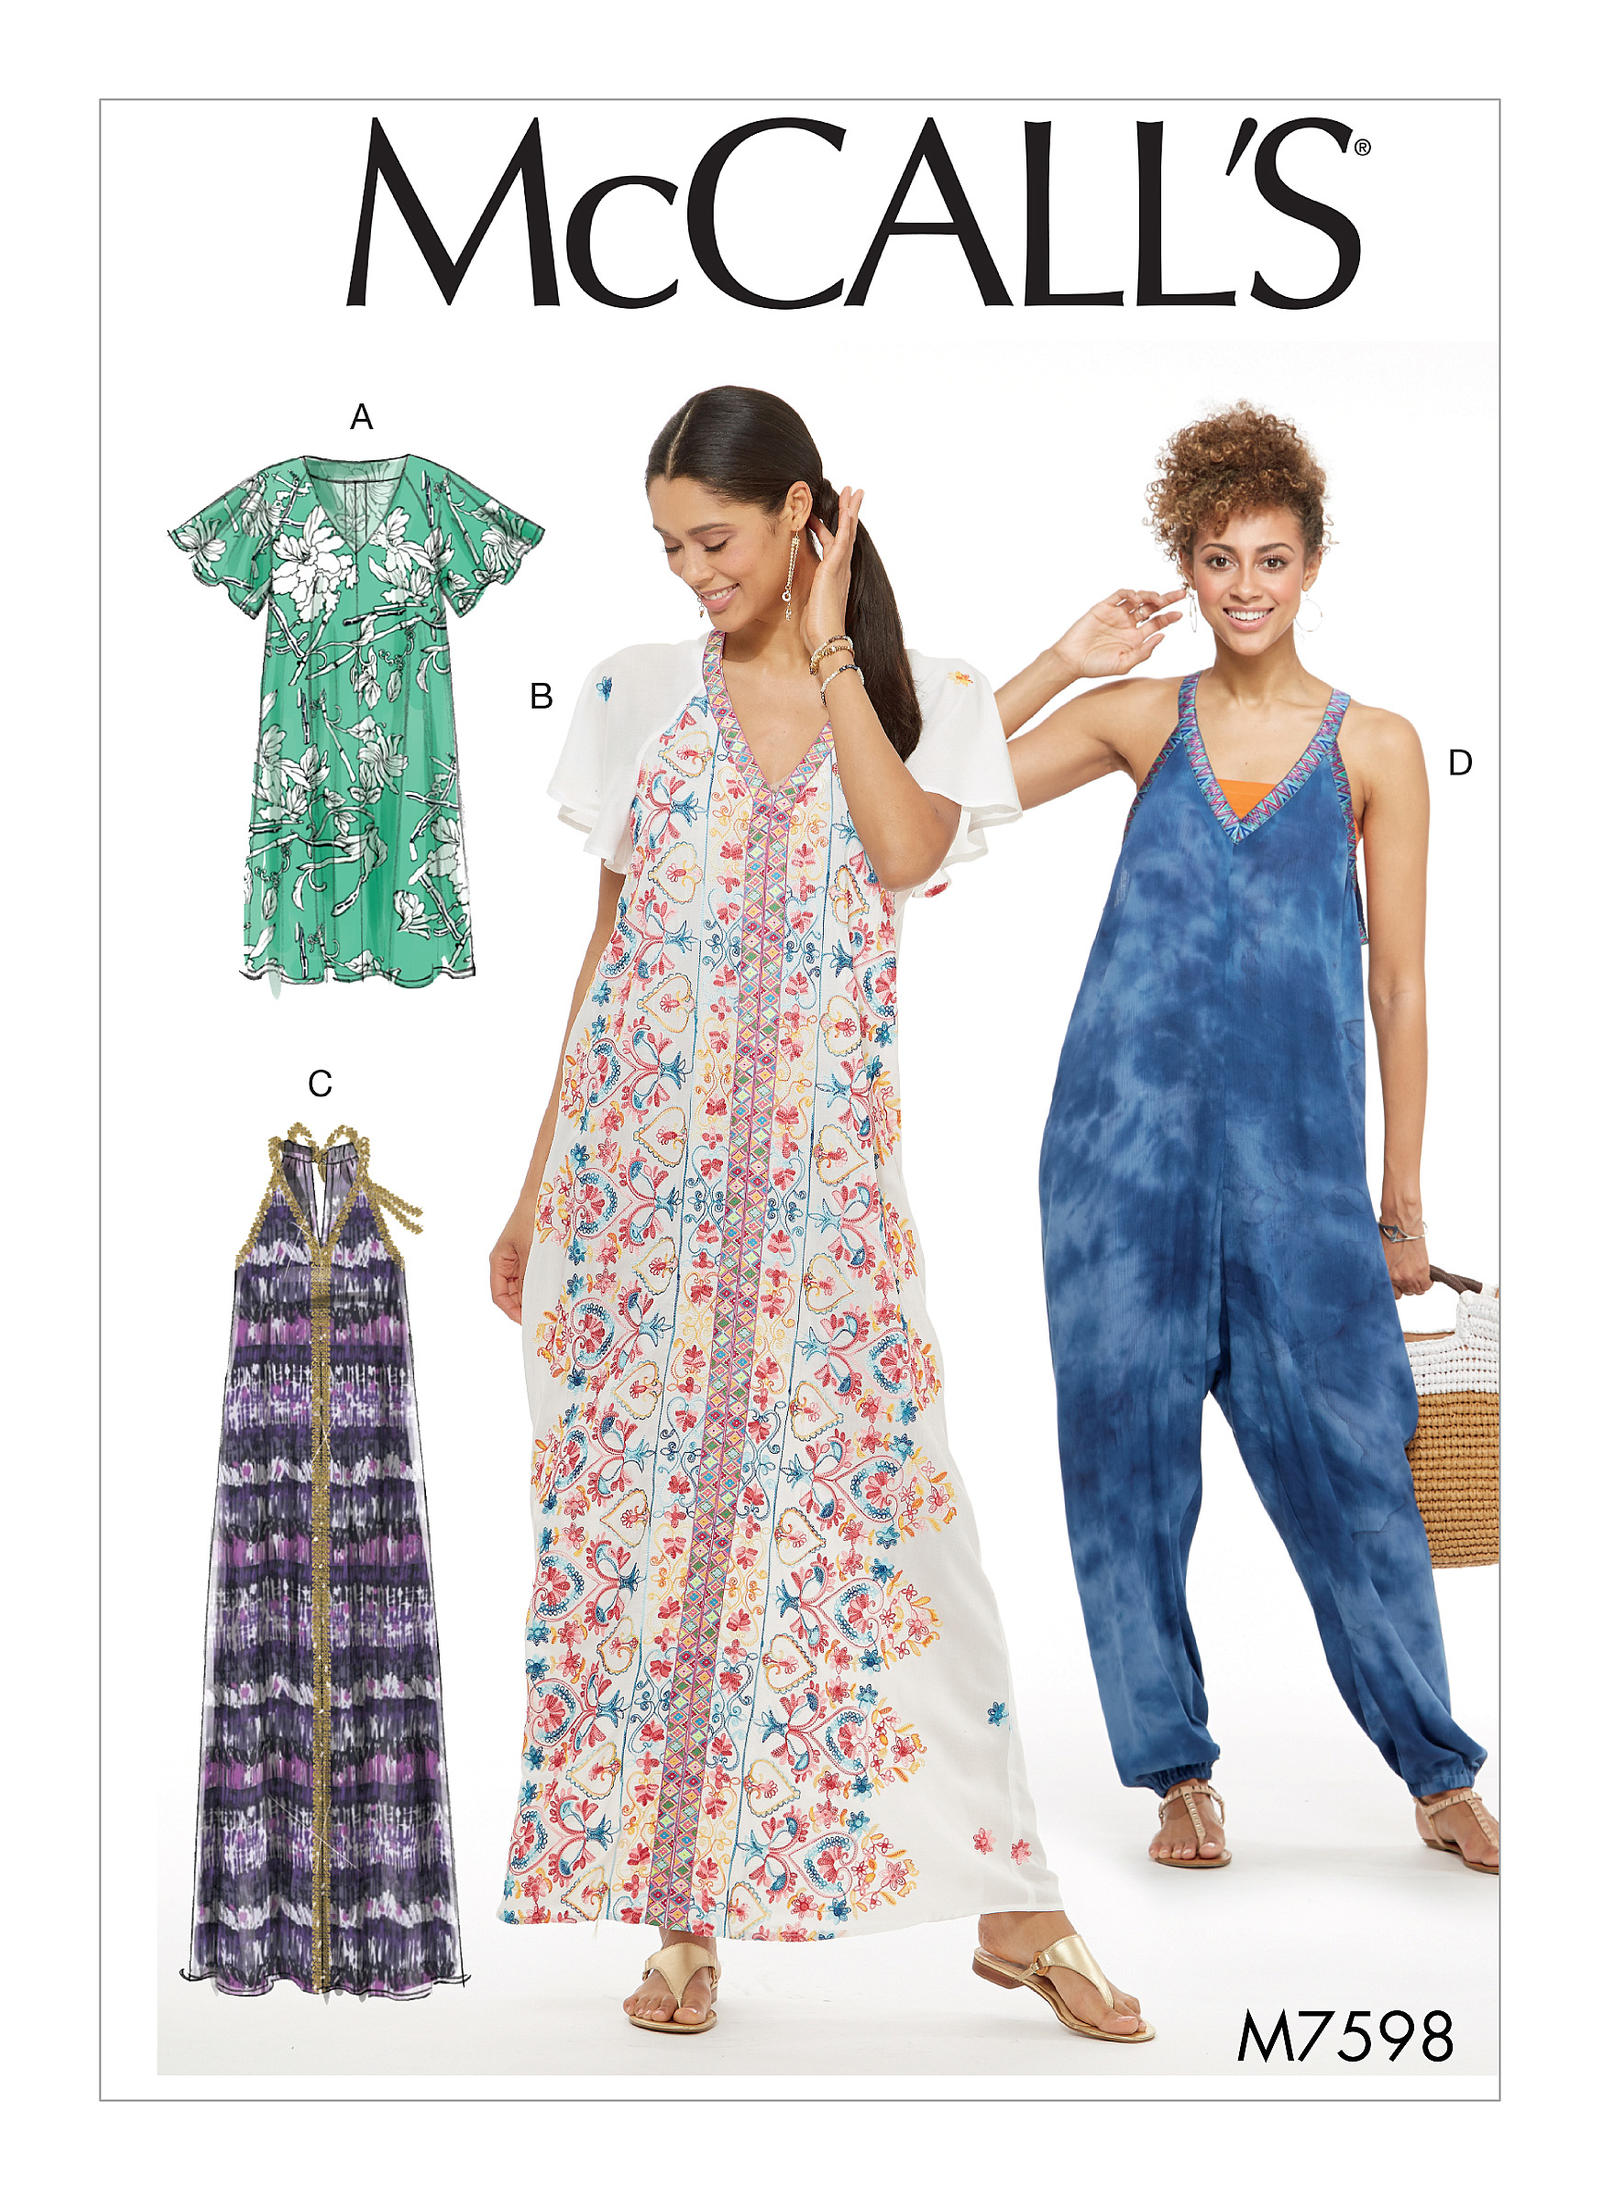 McCall's 7598 Sewing Pattern to MAKE Very Loose-Fitting V-Neck Dress & Jumpsuit 